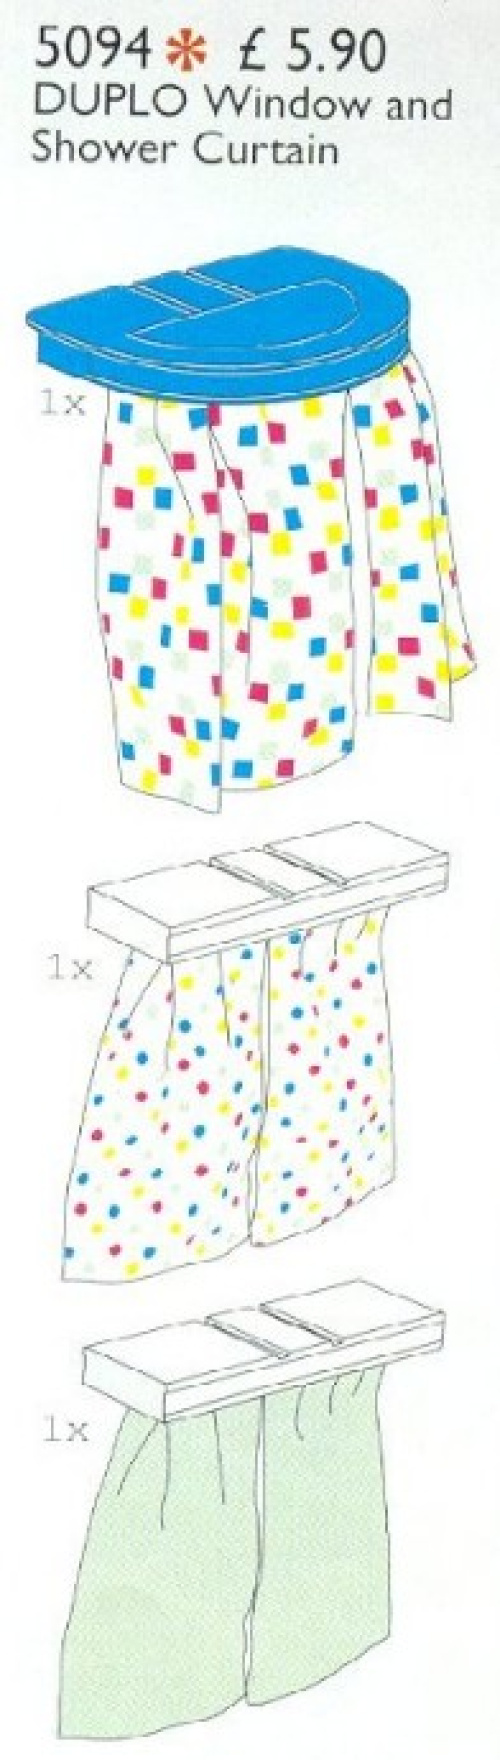 5094-1 Duplo Window and Shower Curtains